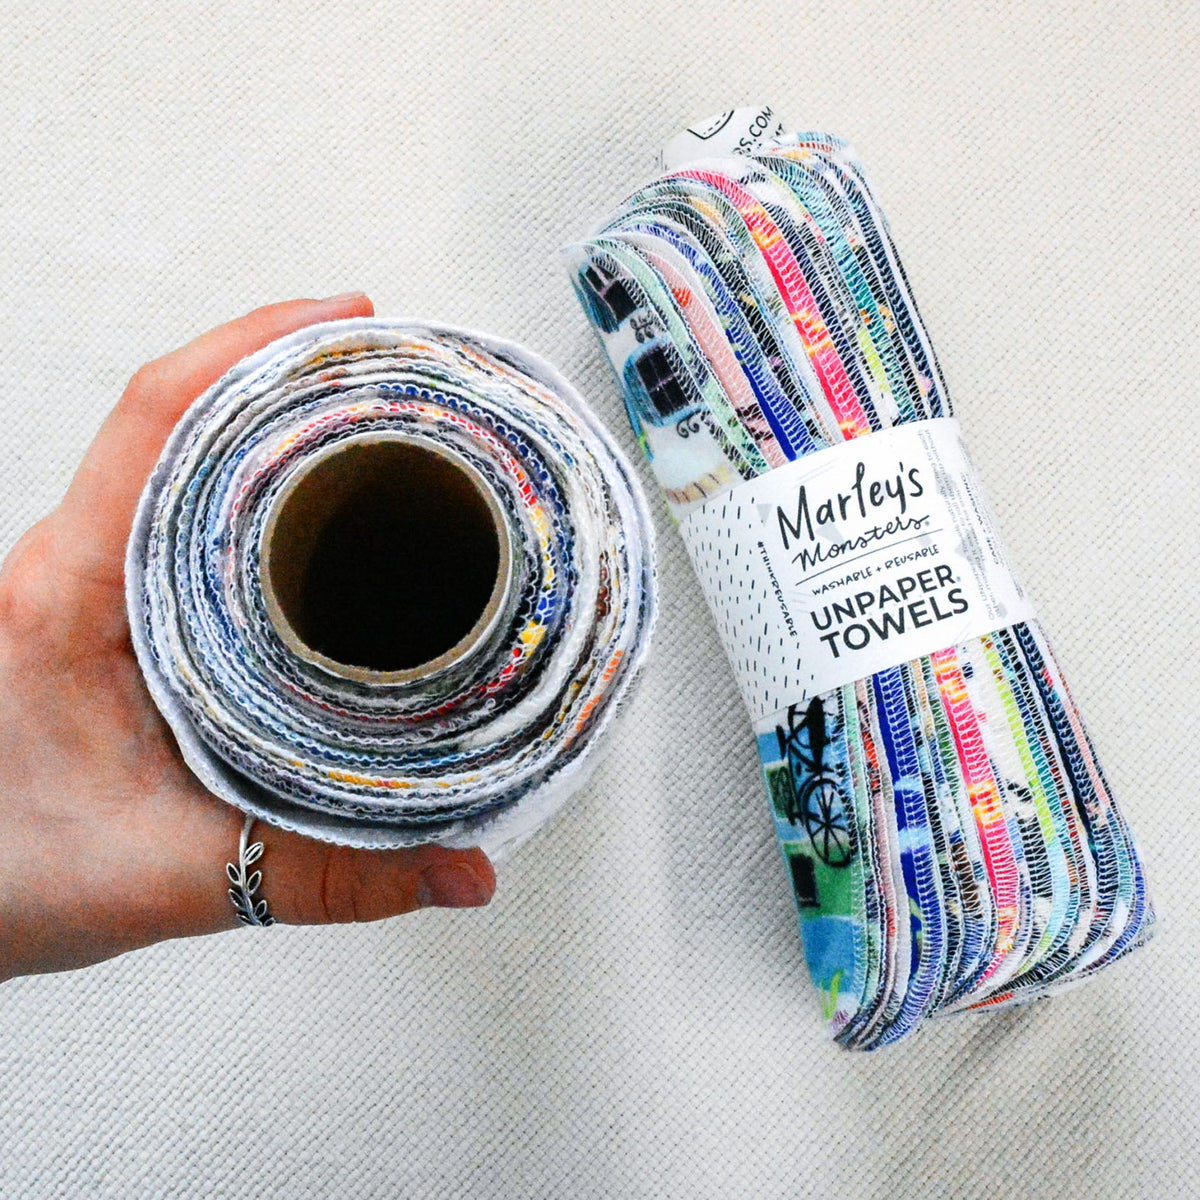 13 Best Reusable Paper Towels For Tree-Free Spills & Cleans